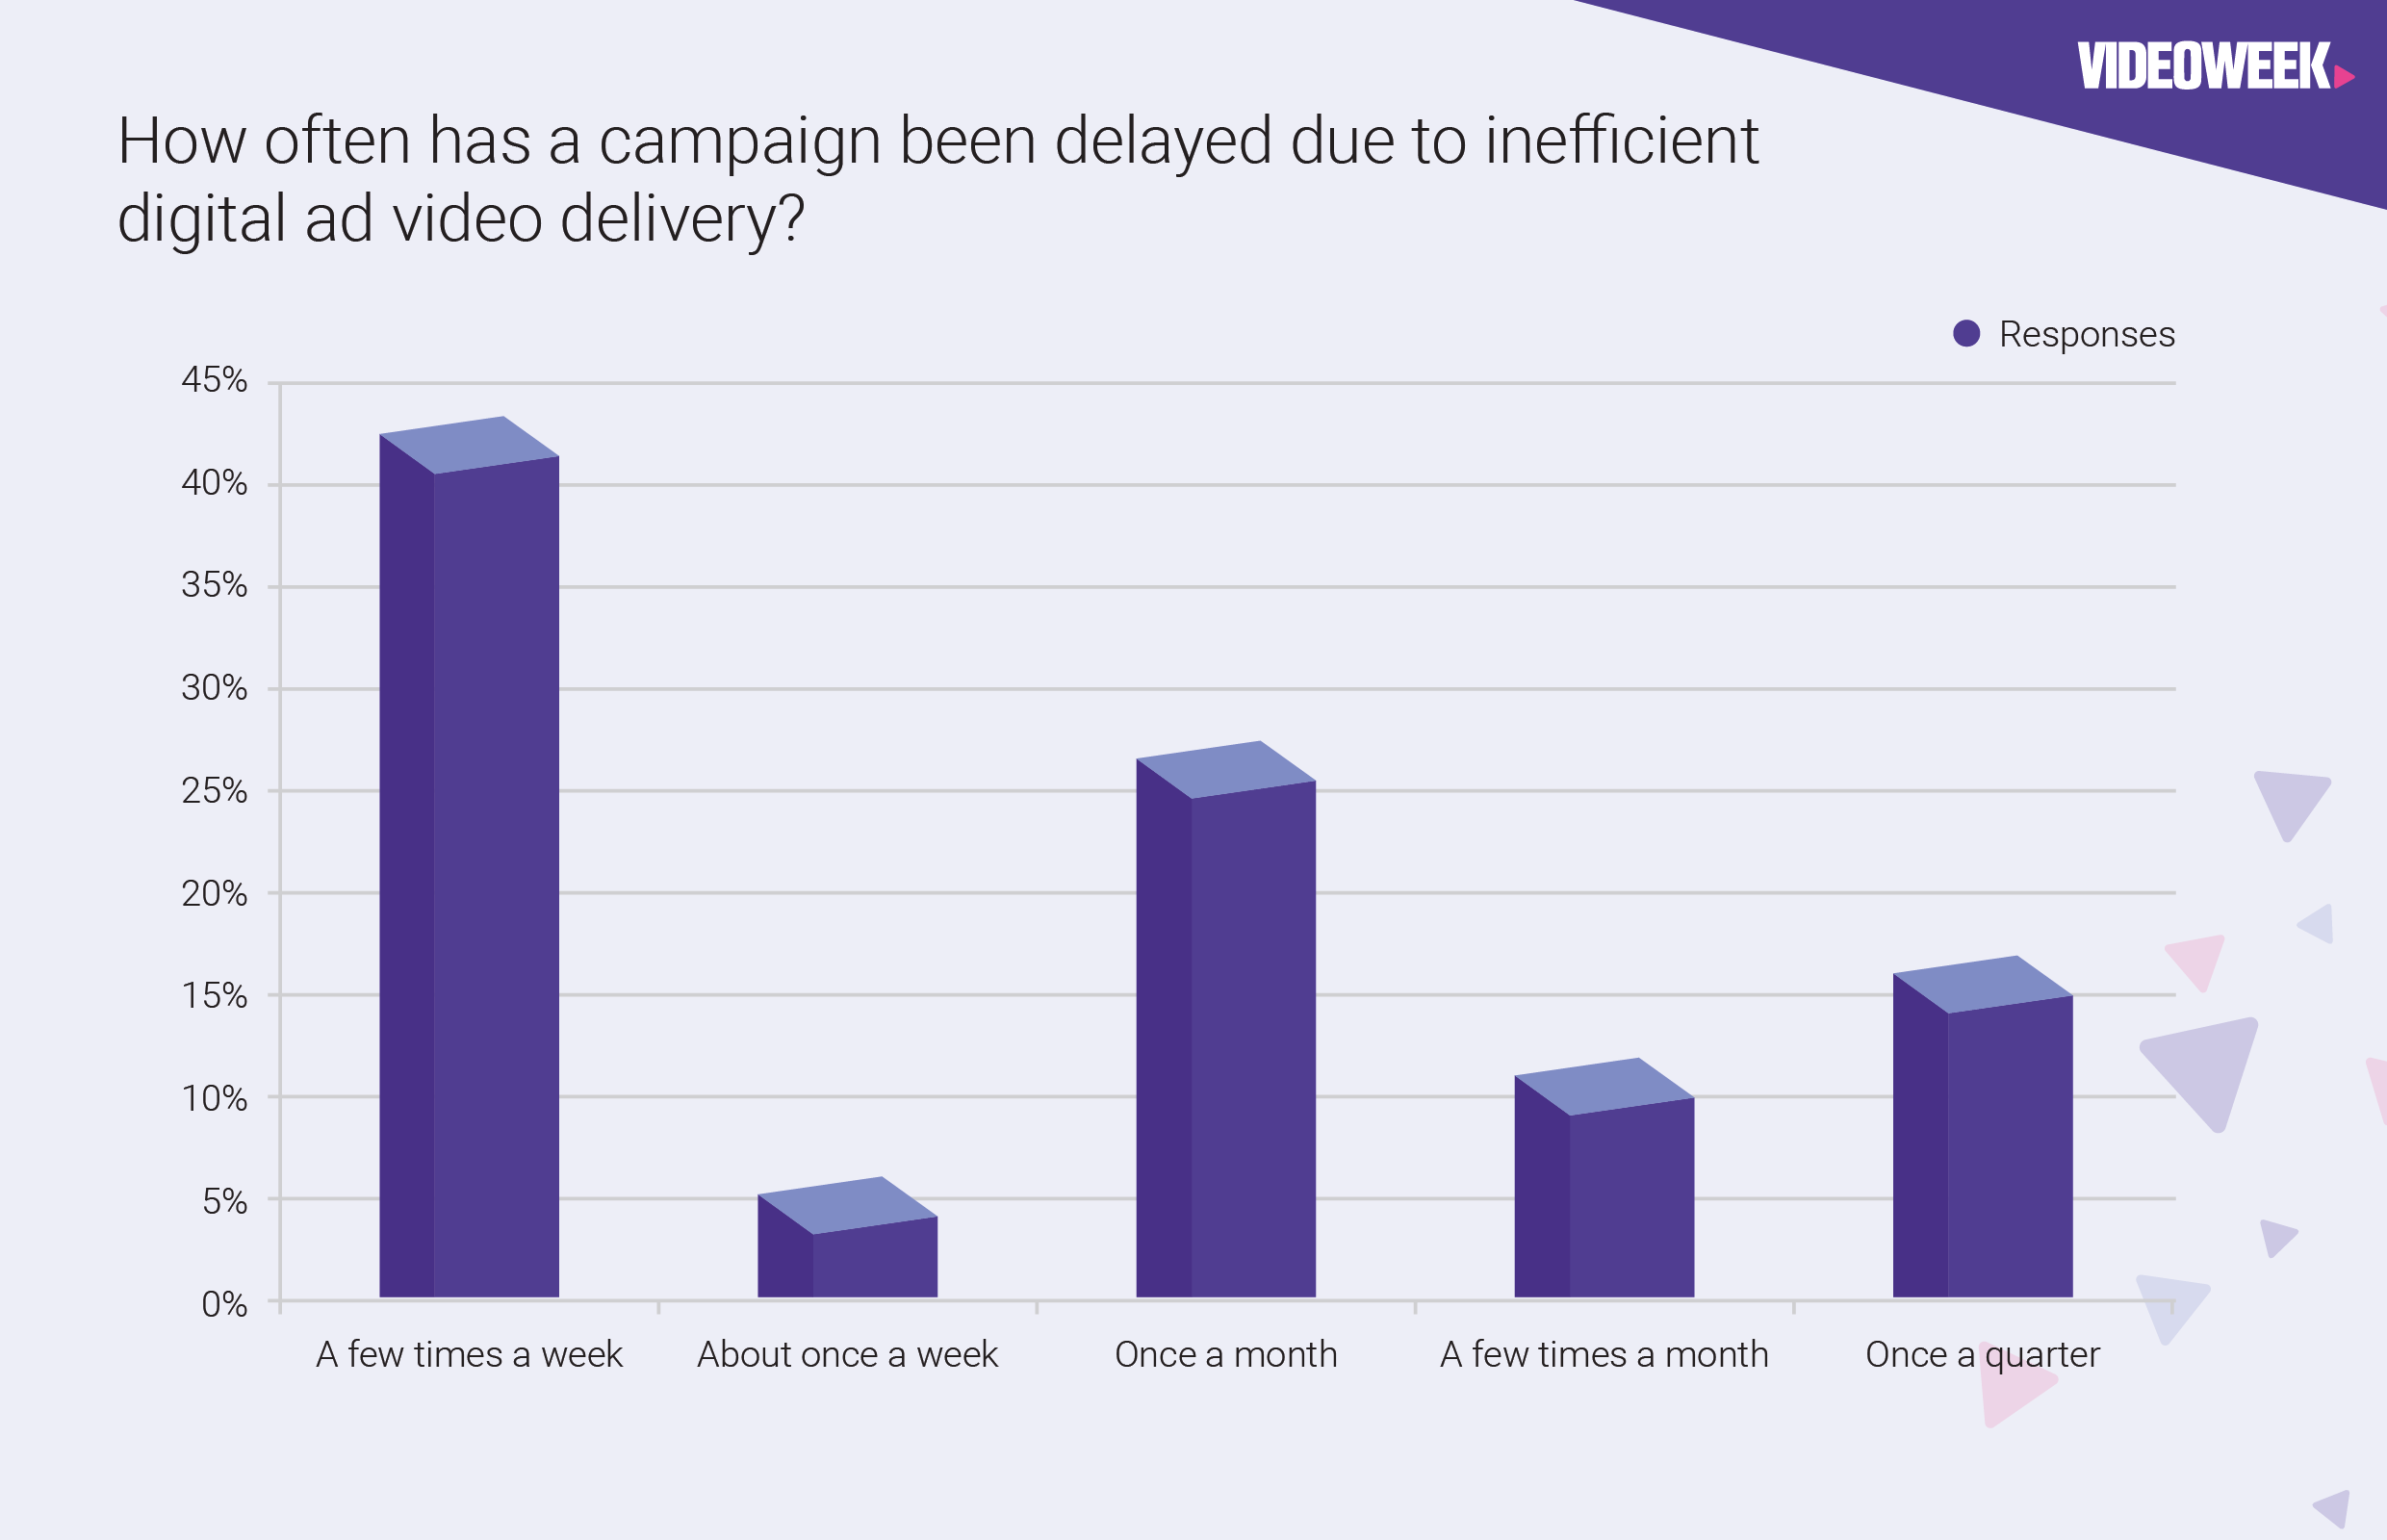 How often has a campaign been delayed due to ineﬃcient digital ad video delivery?